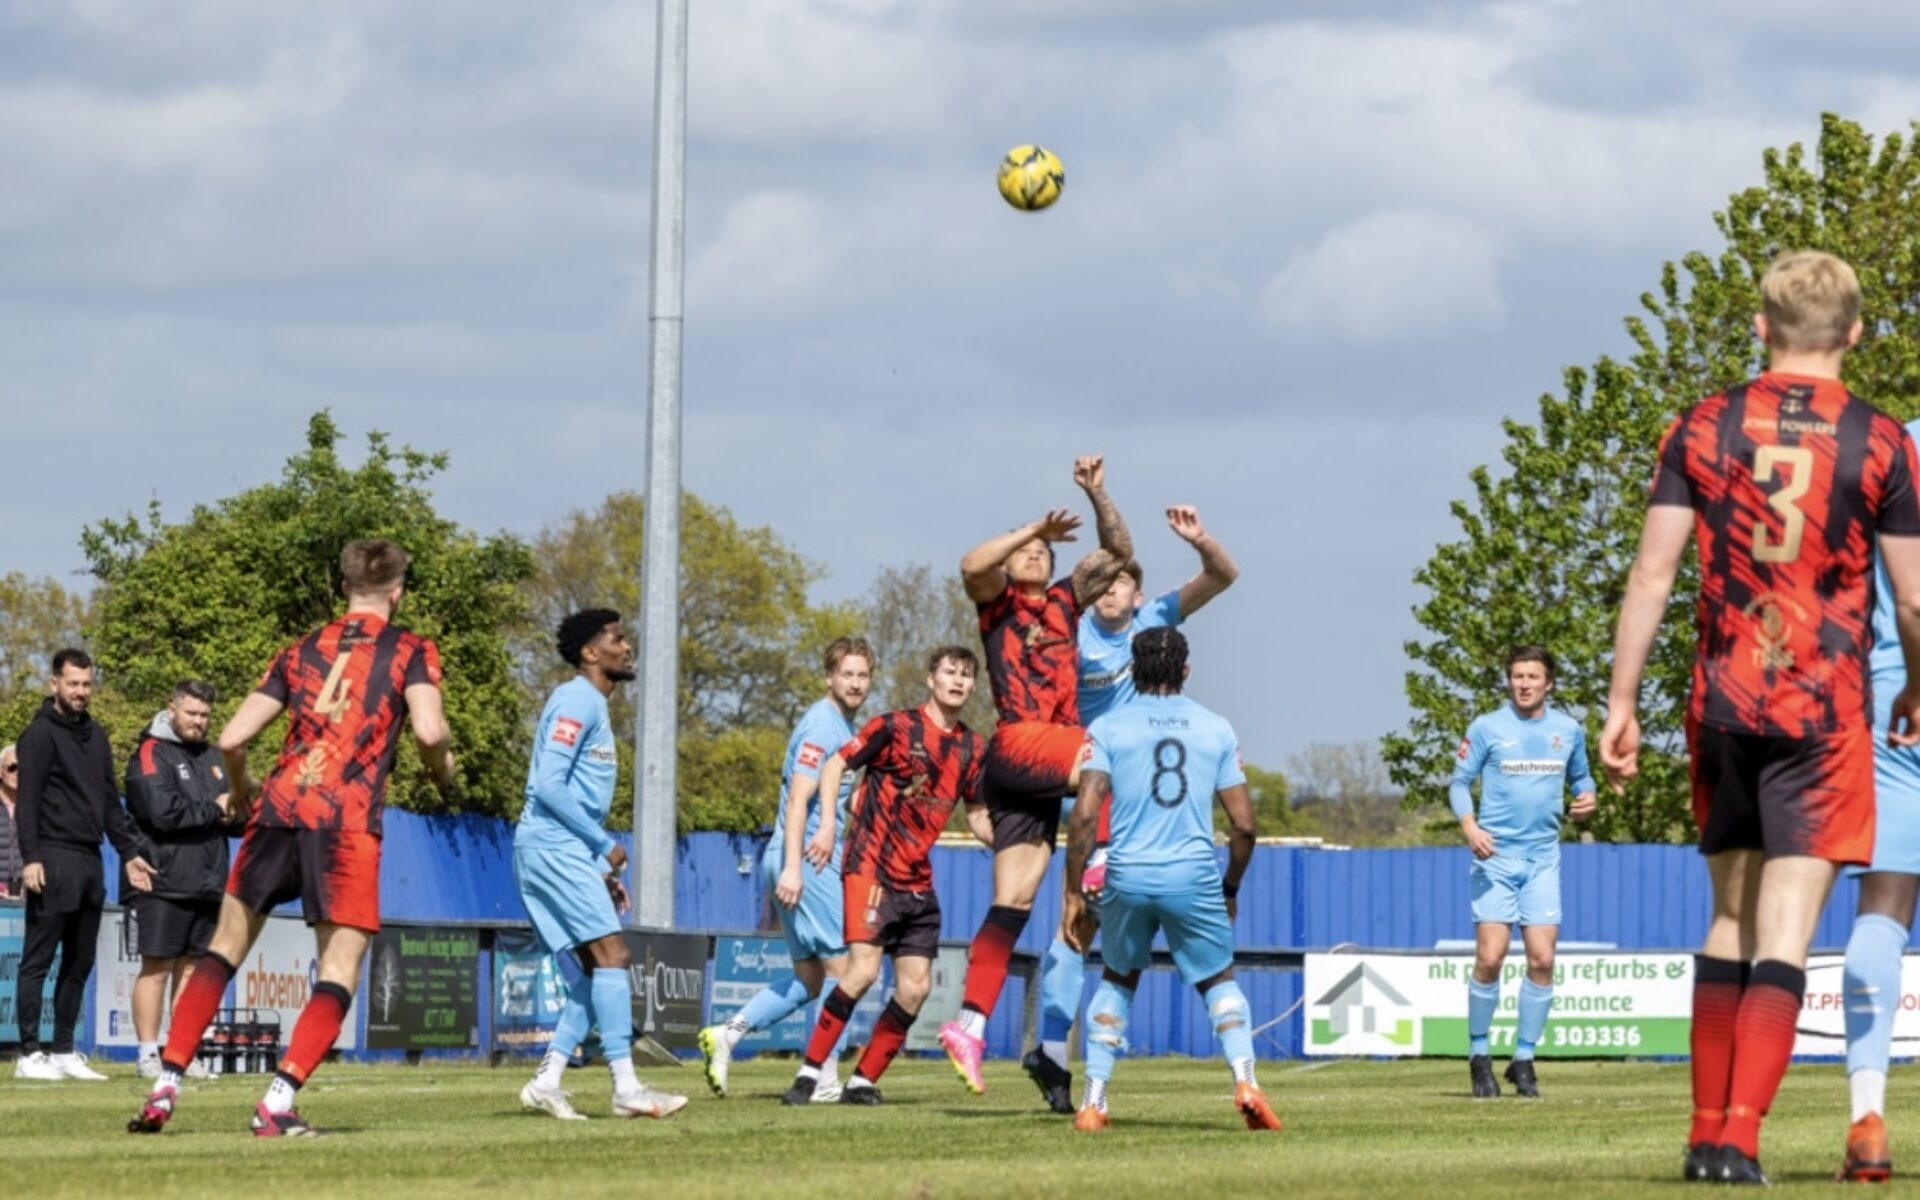 Brentwood Town v Brightlingsea Regent - Match Report Featured Image